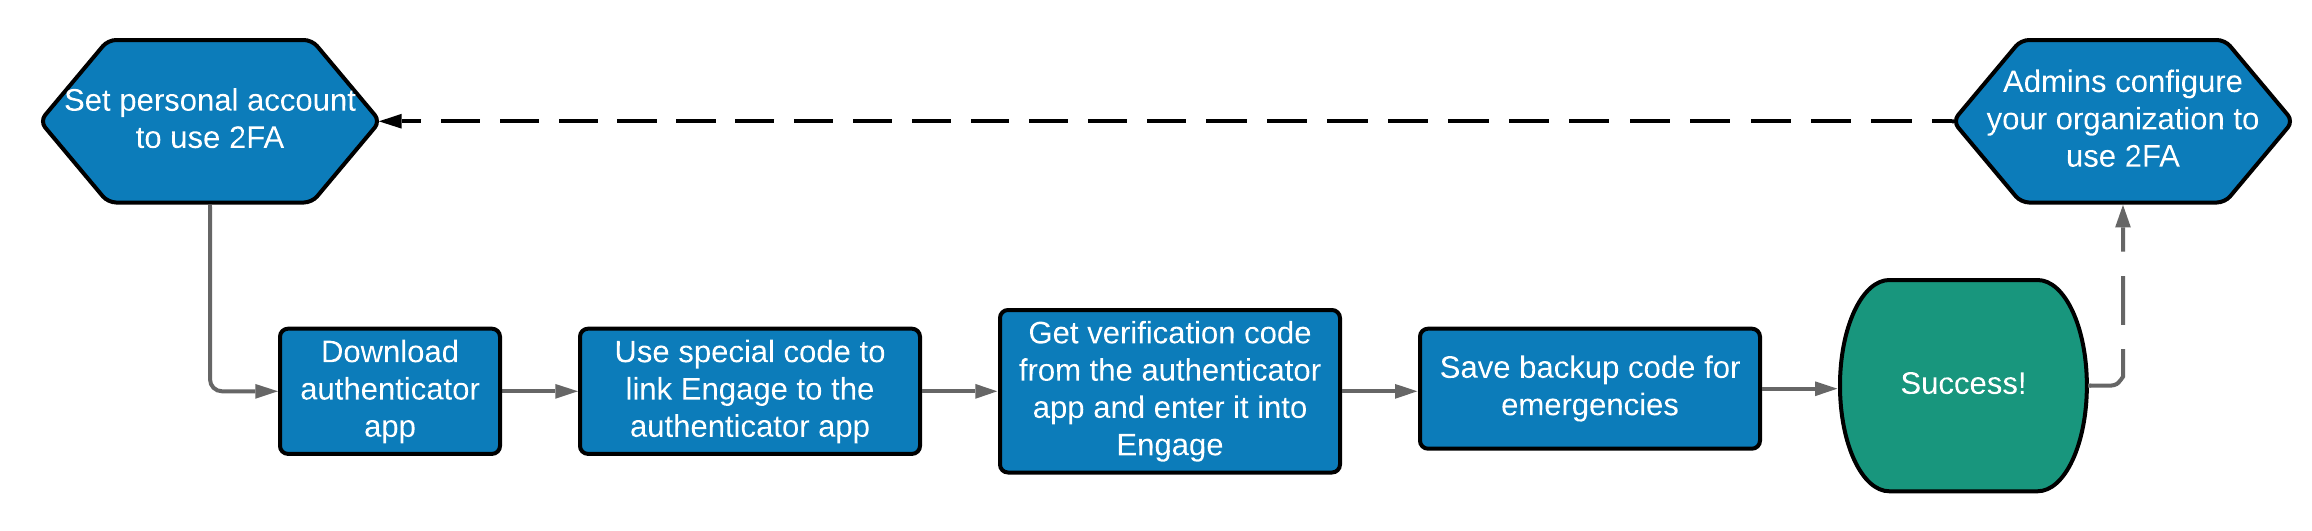 Engage_2FA_Configuration_Workflow.png